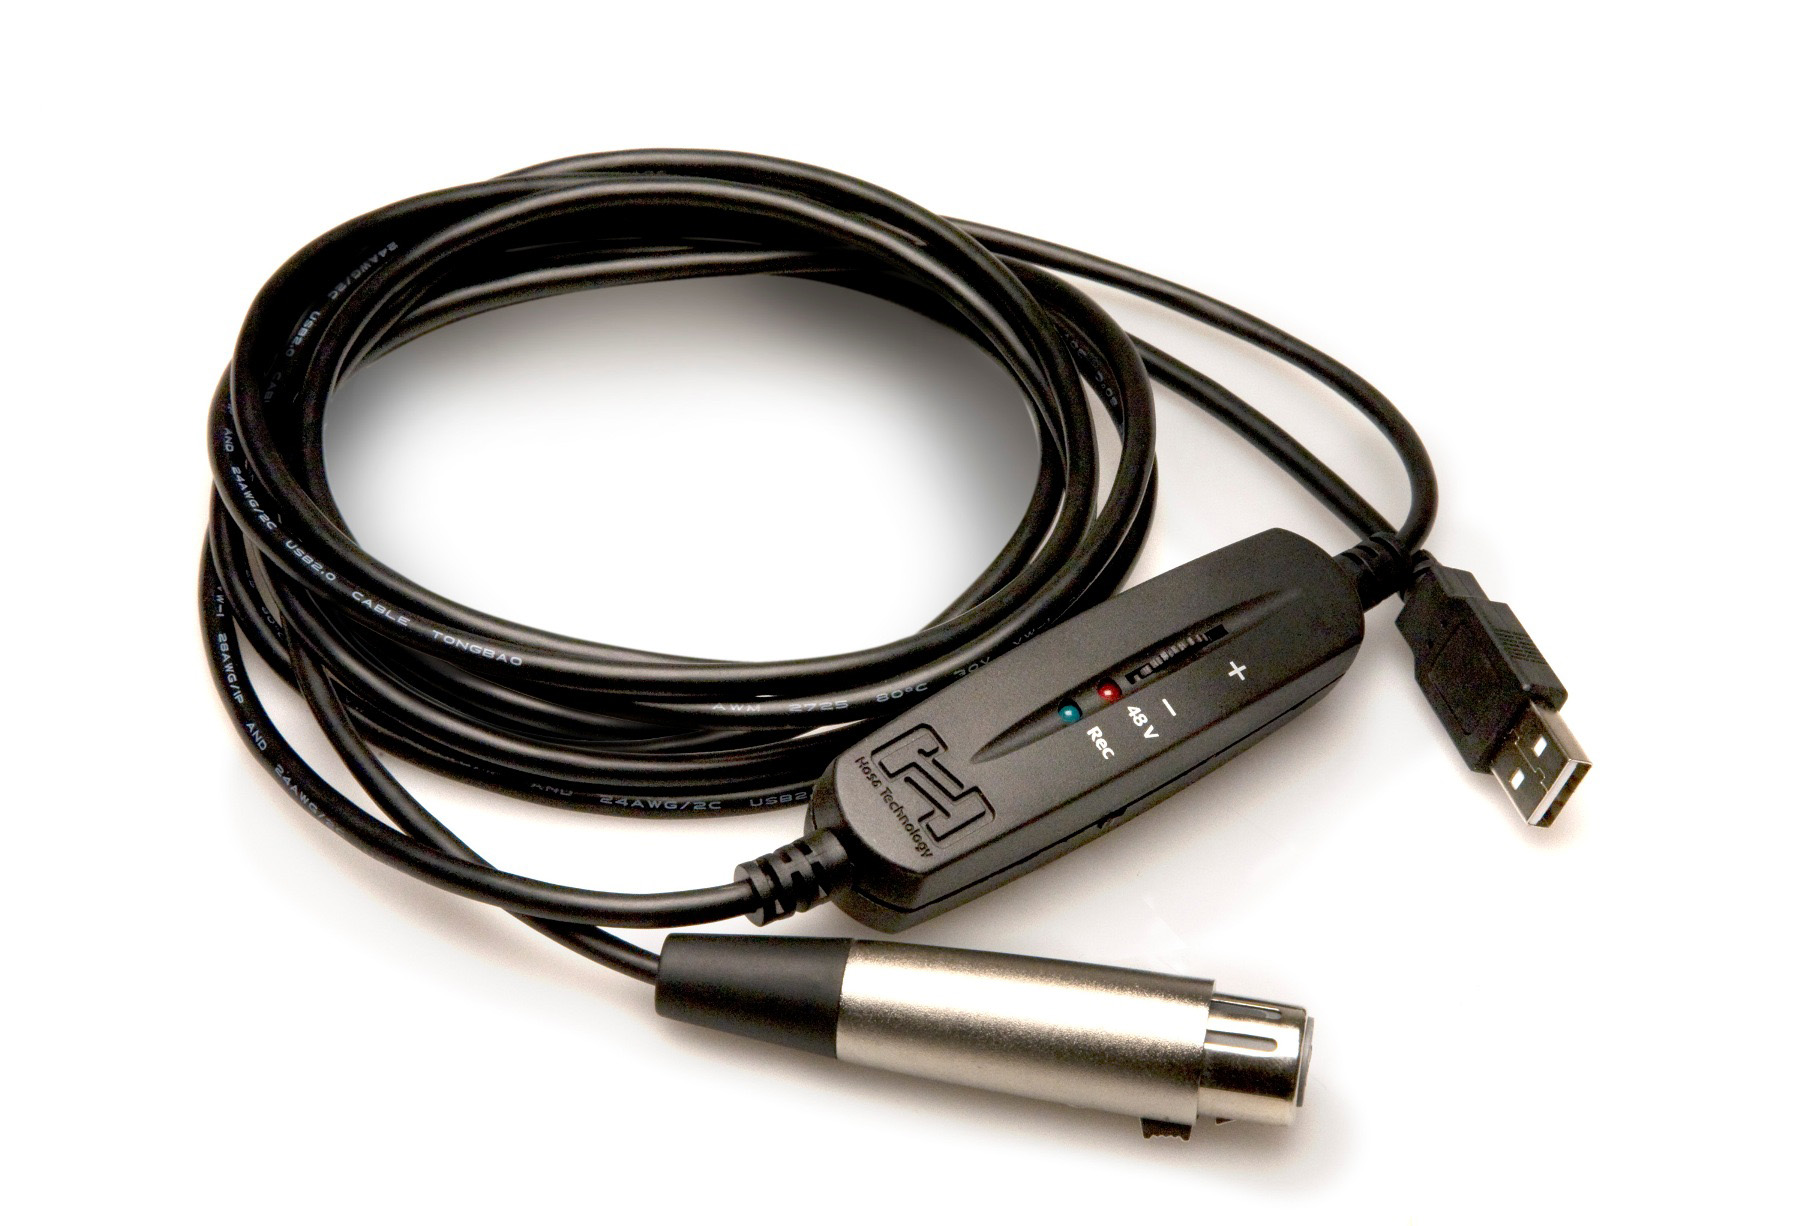 TRACKLINK MIDI to USB Interface Cable